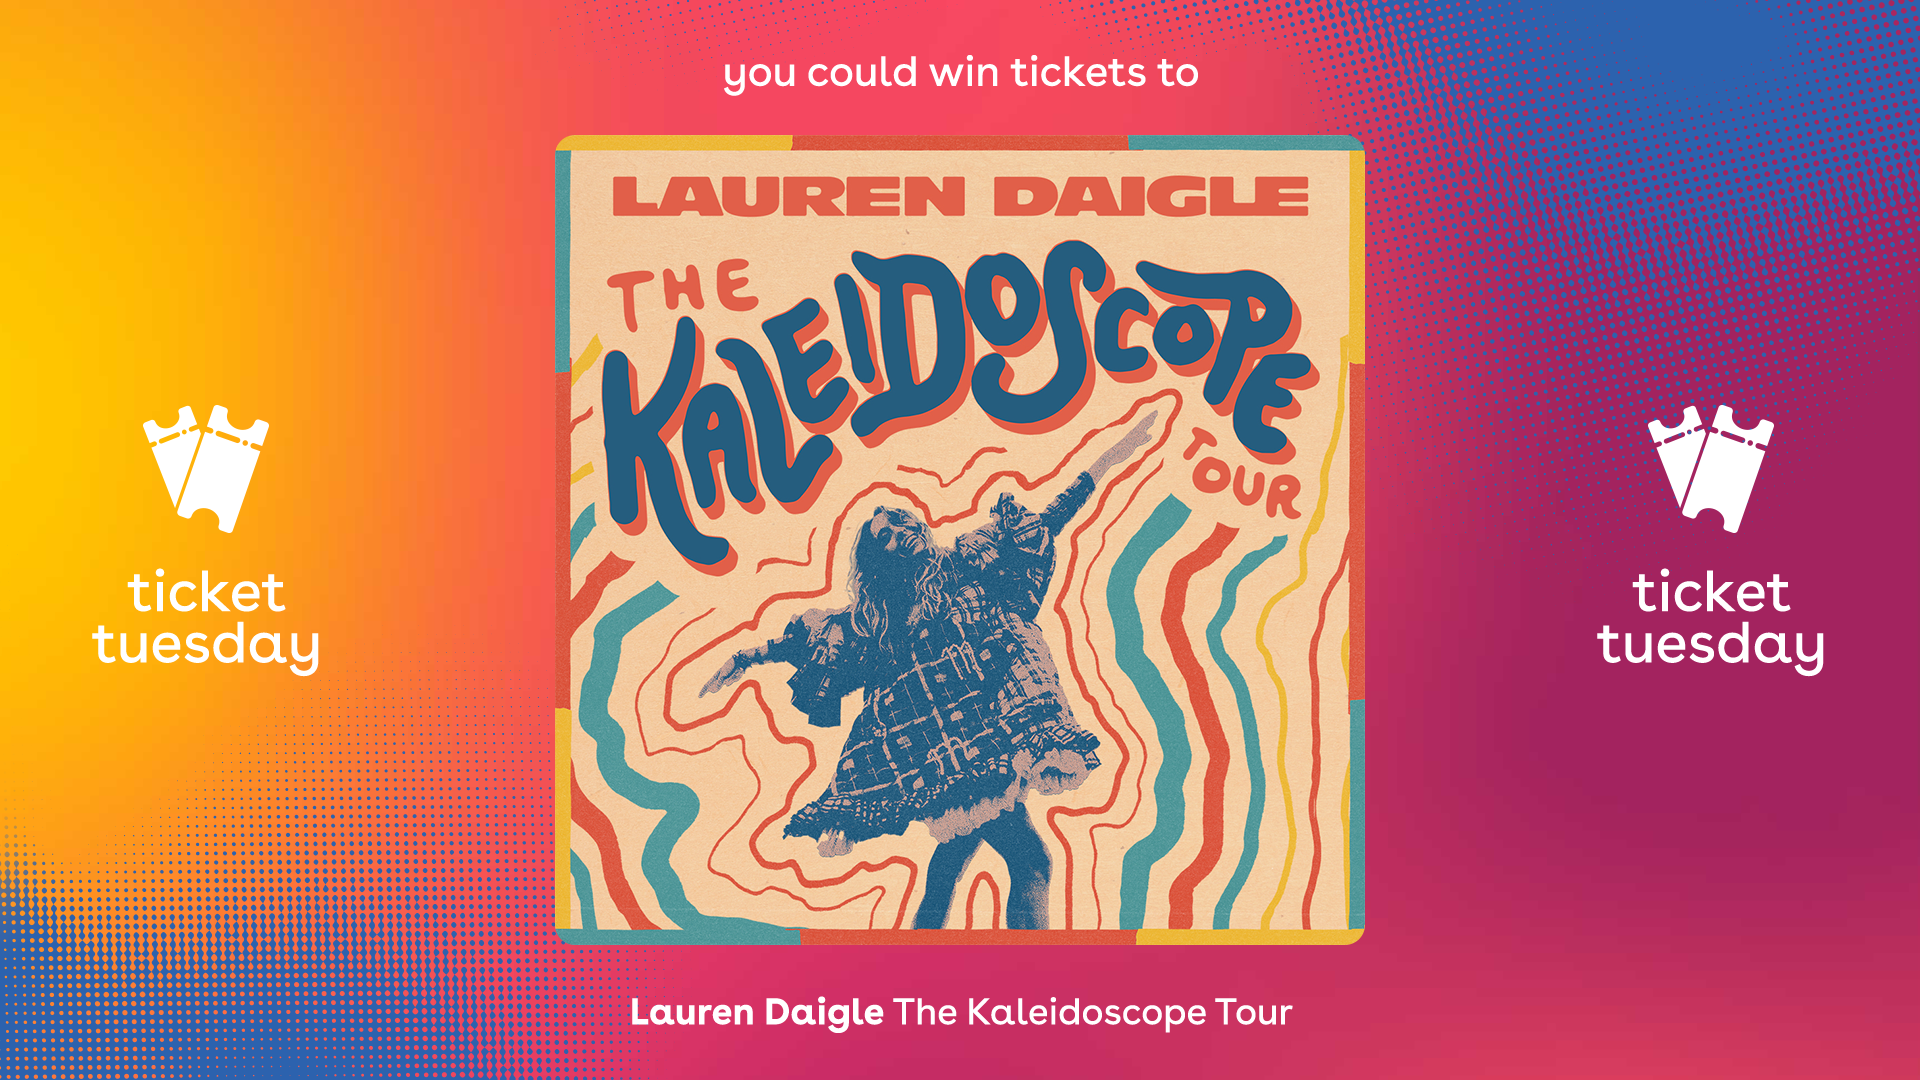 Lauren Daigle smiling with her arms out straight to her side in a dancing motion with the words "Lauren Daigle Kaleidoscope Tour" written above her